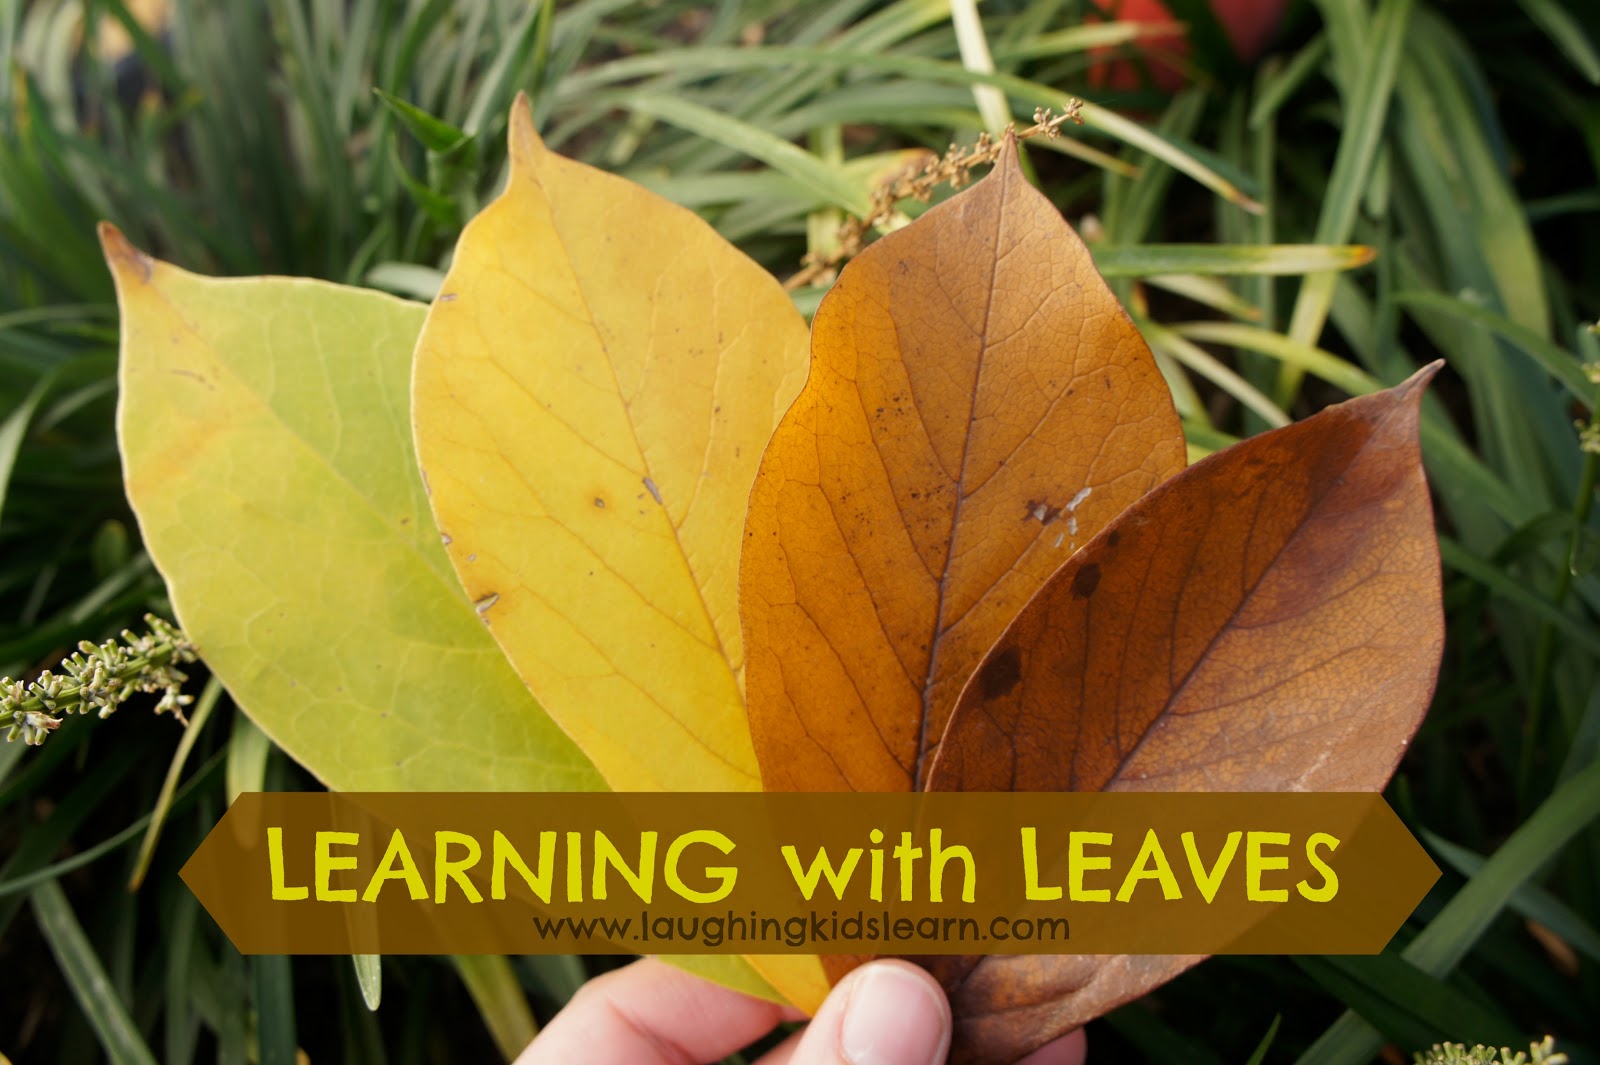 Learning with Leaves Laughing Kids Learn